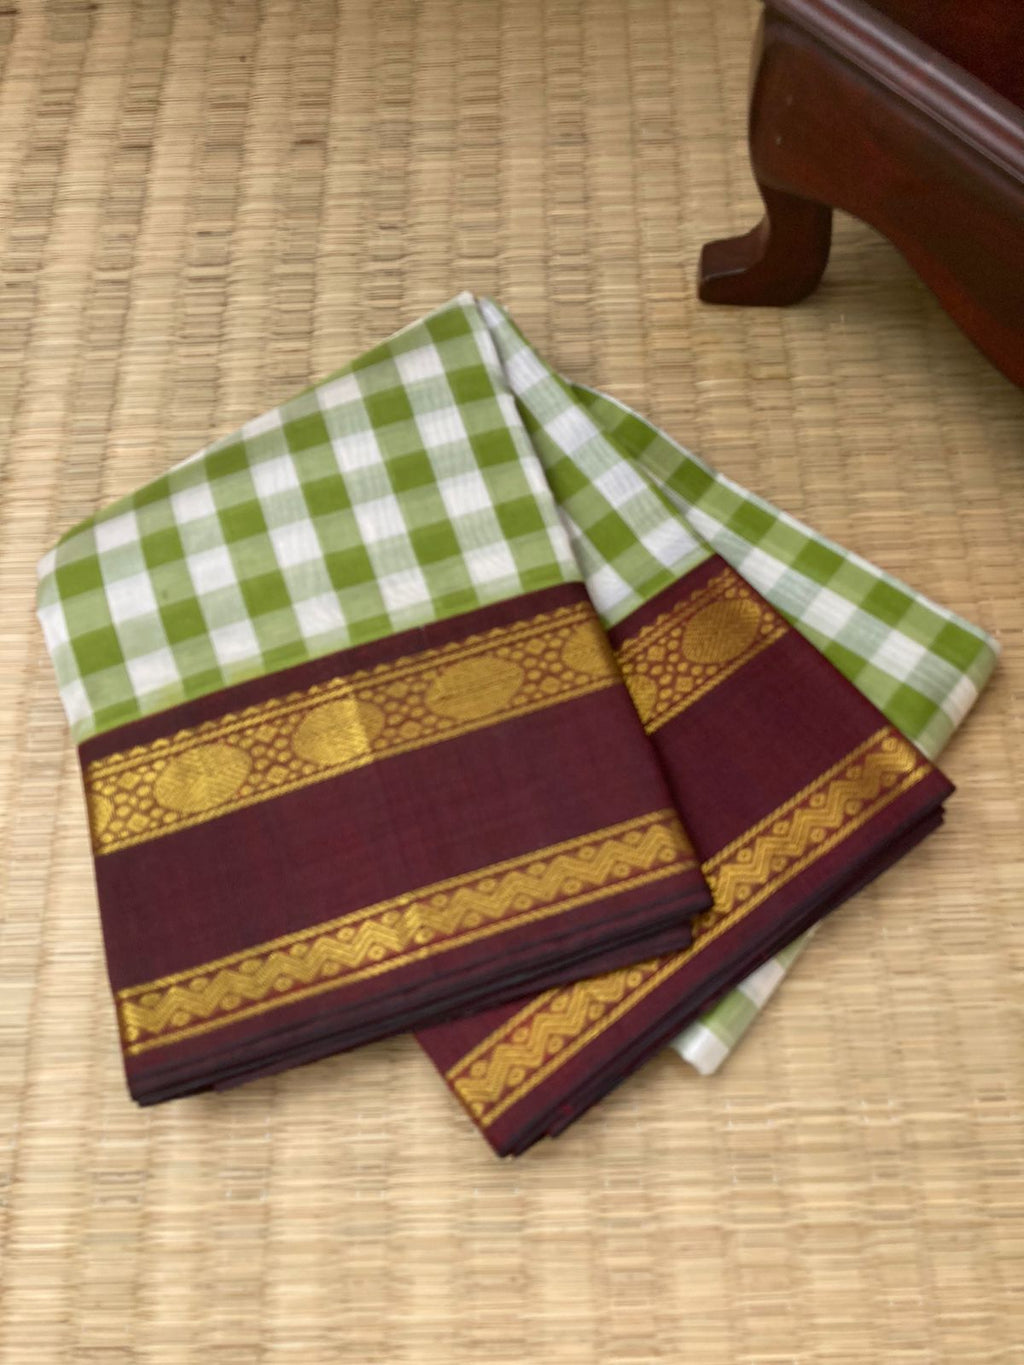 Paalum Palamum Kattams Korvai Silk Cottons - olive and off white with coffee bean brown